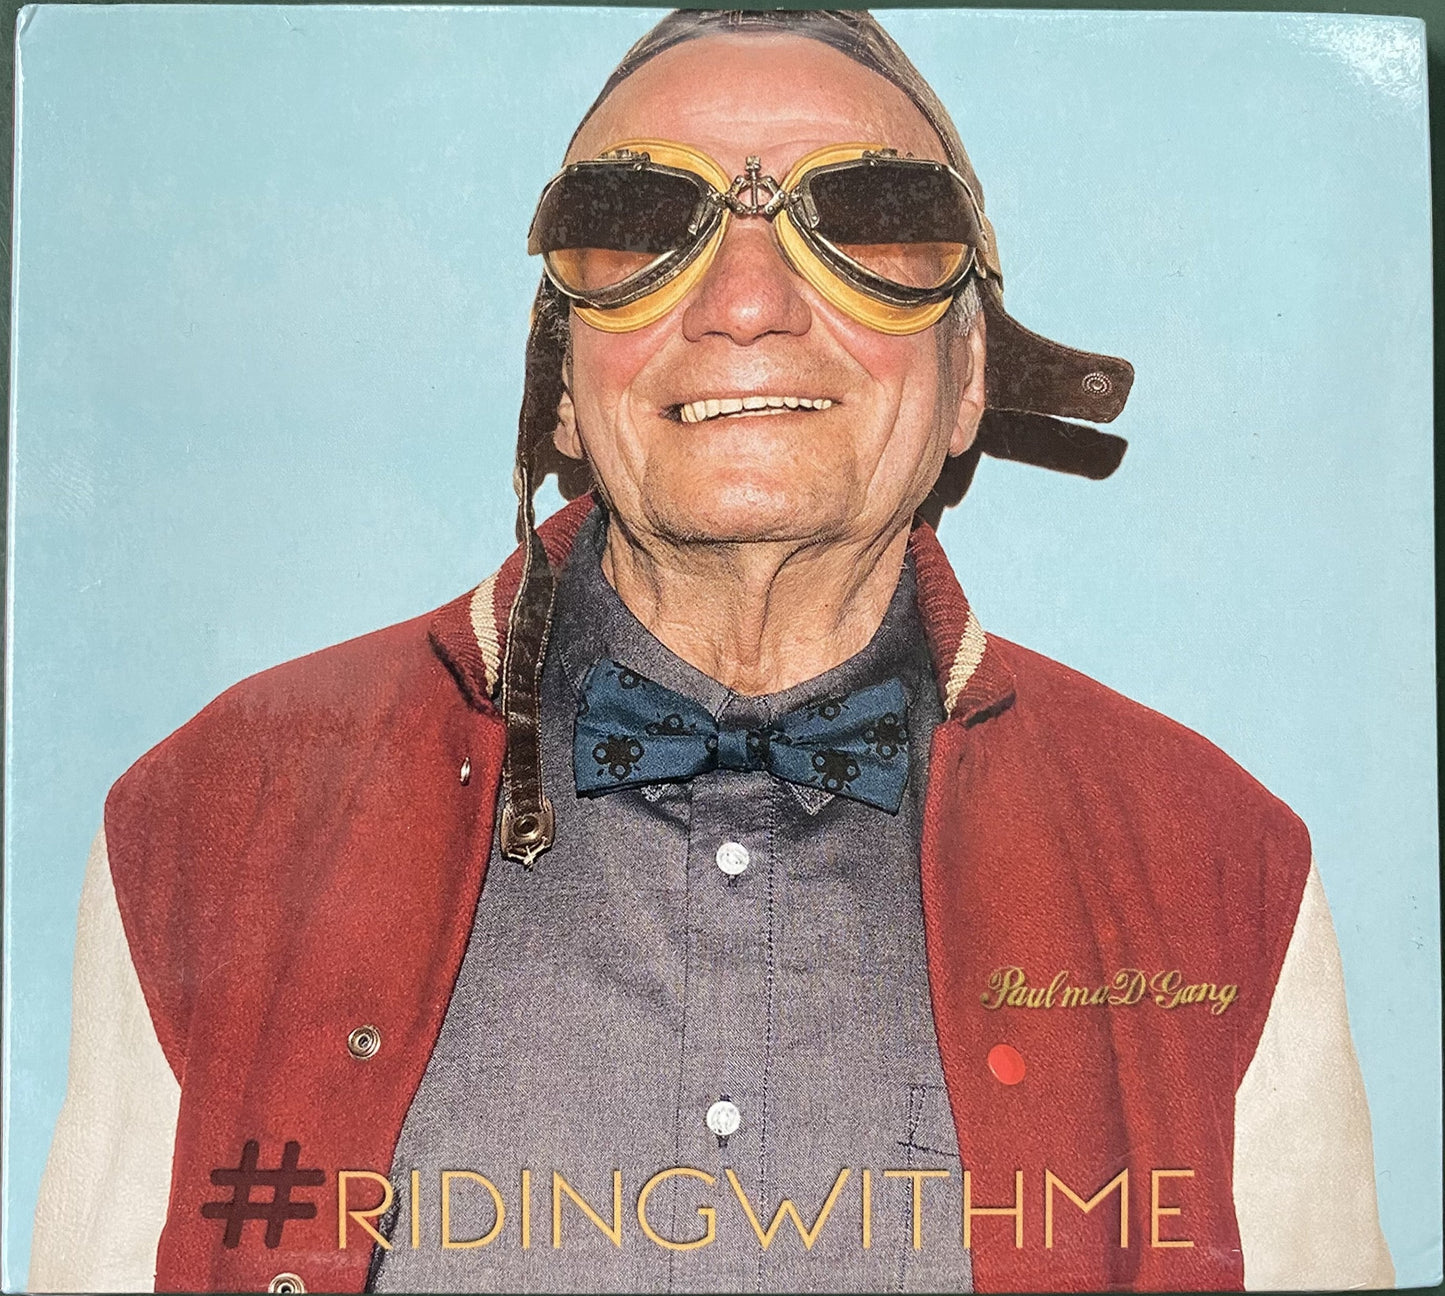 z Paul maD Gang - Riding with me CD (2013)